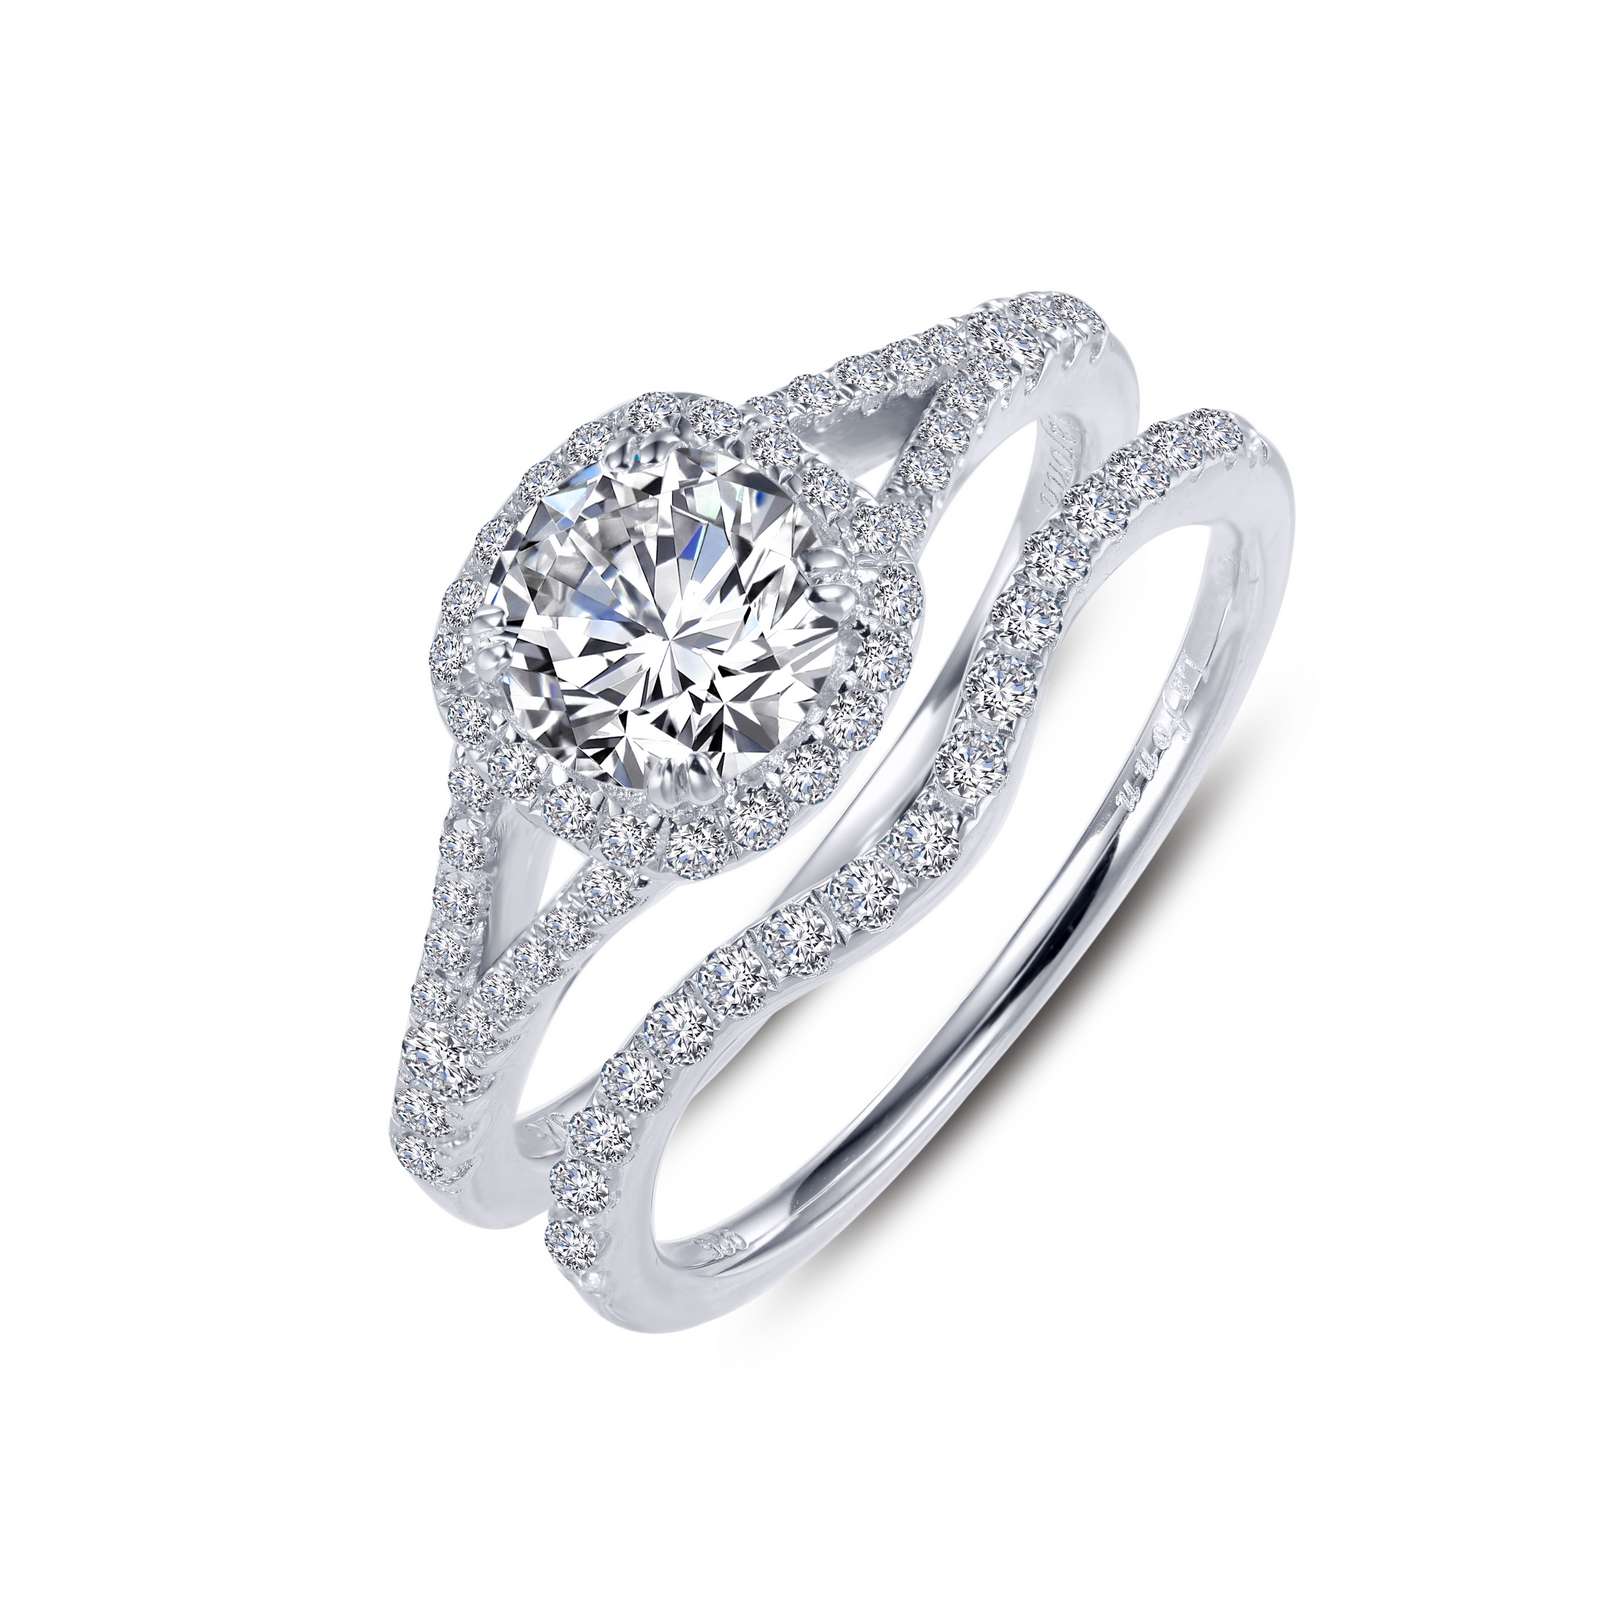 Classic Simulated Diamond Platinum Bonded Ring Griner Jewelry Co. Moultrie, GA